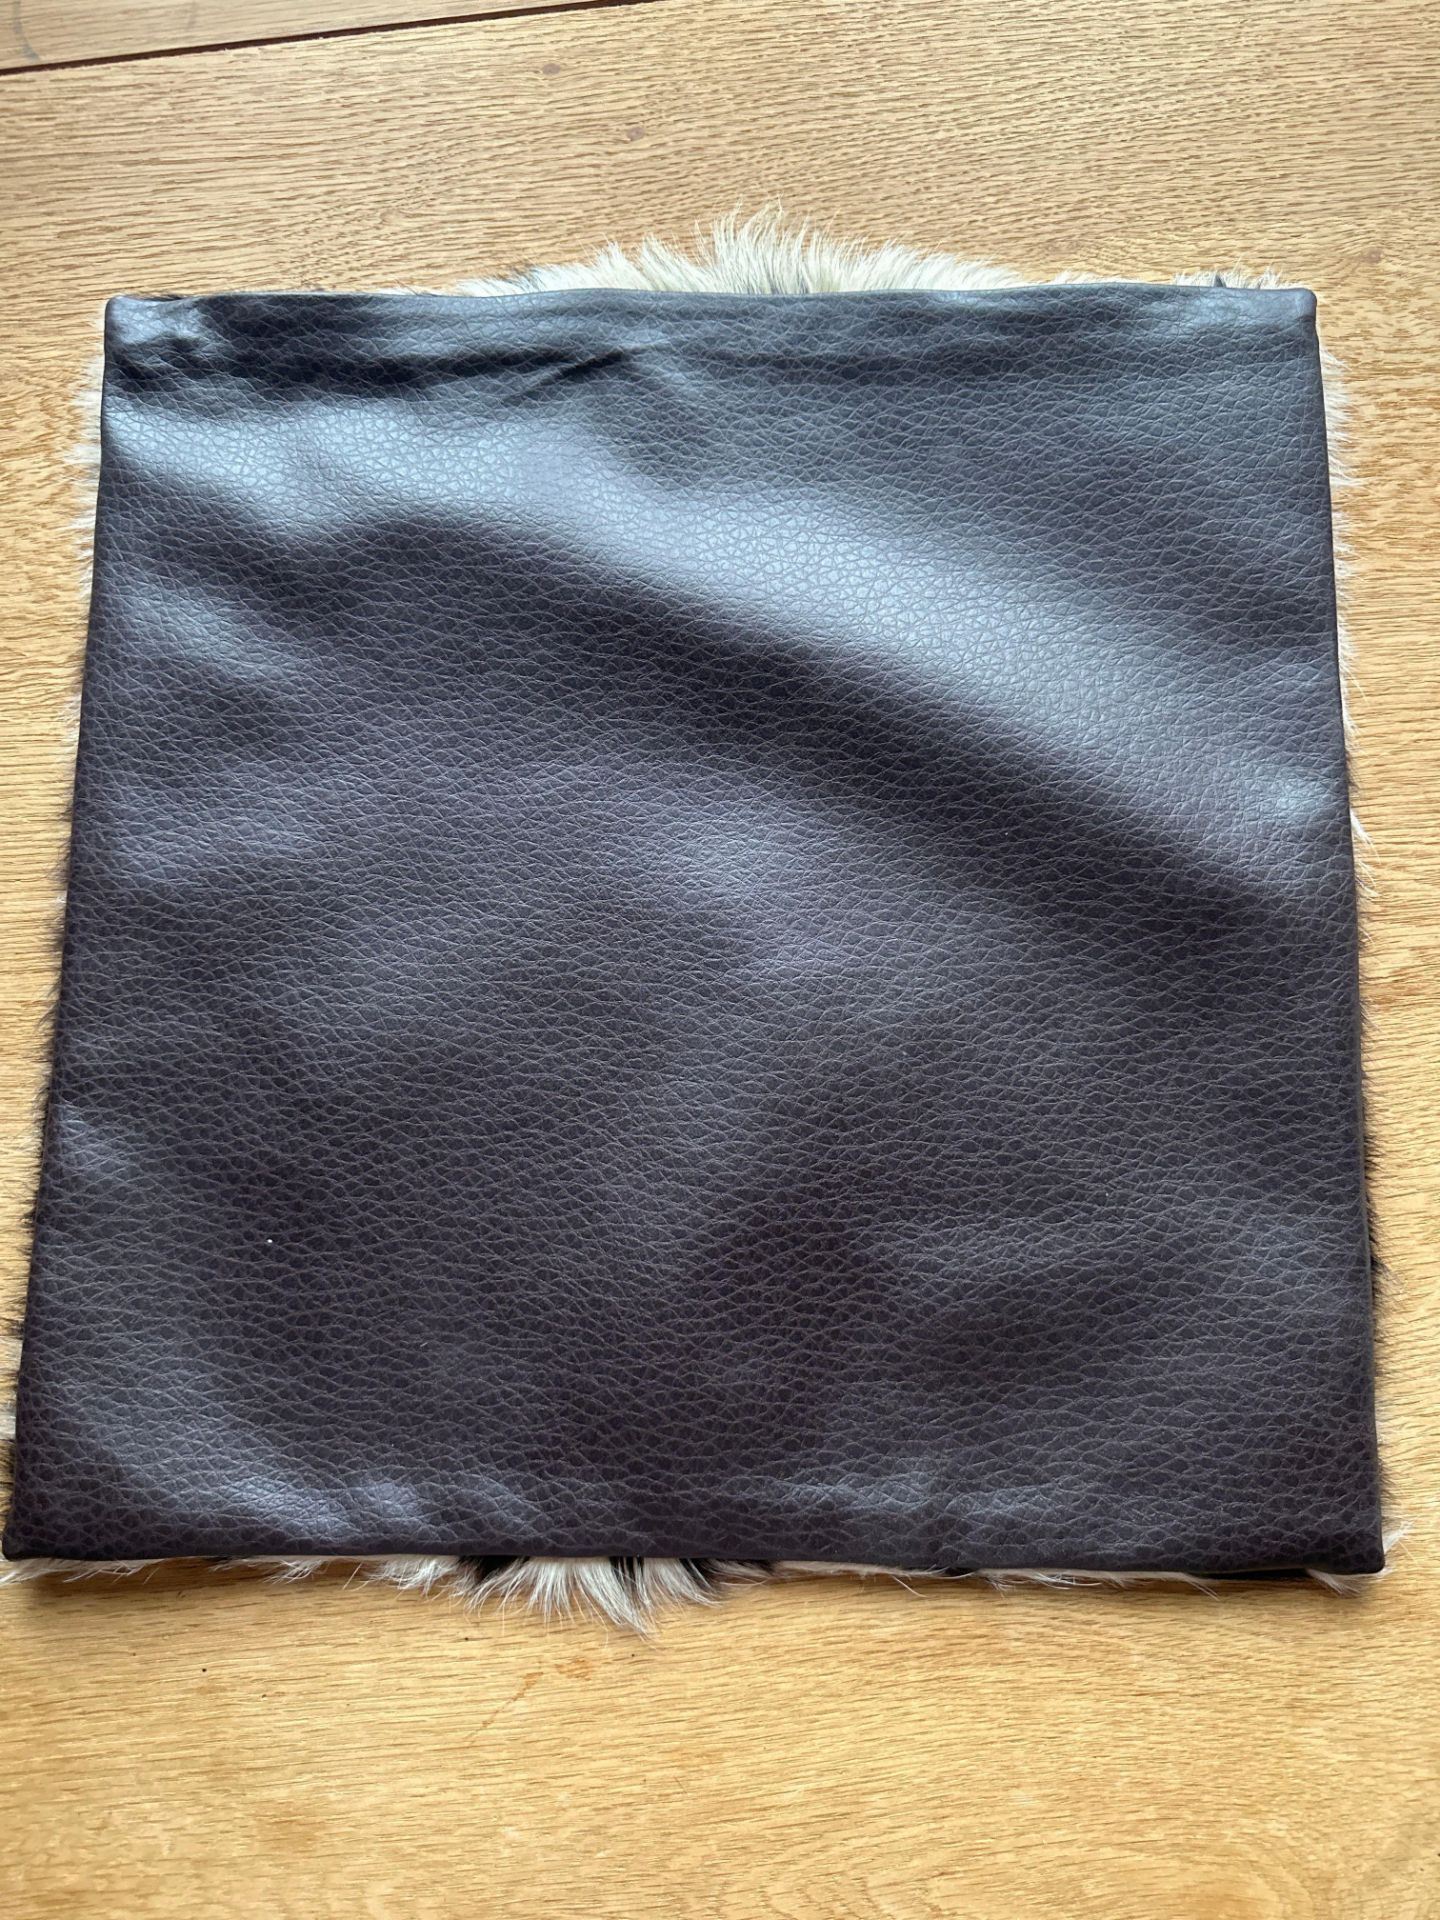 Cowhide Leather Cushion Cover 100% NaturalÂ Cowhide Leather Cushion Is Single-Sided And Rich In - Image 3 of 4